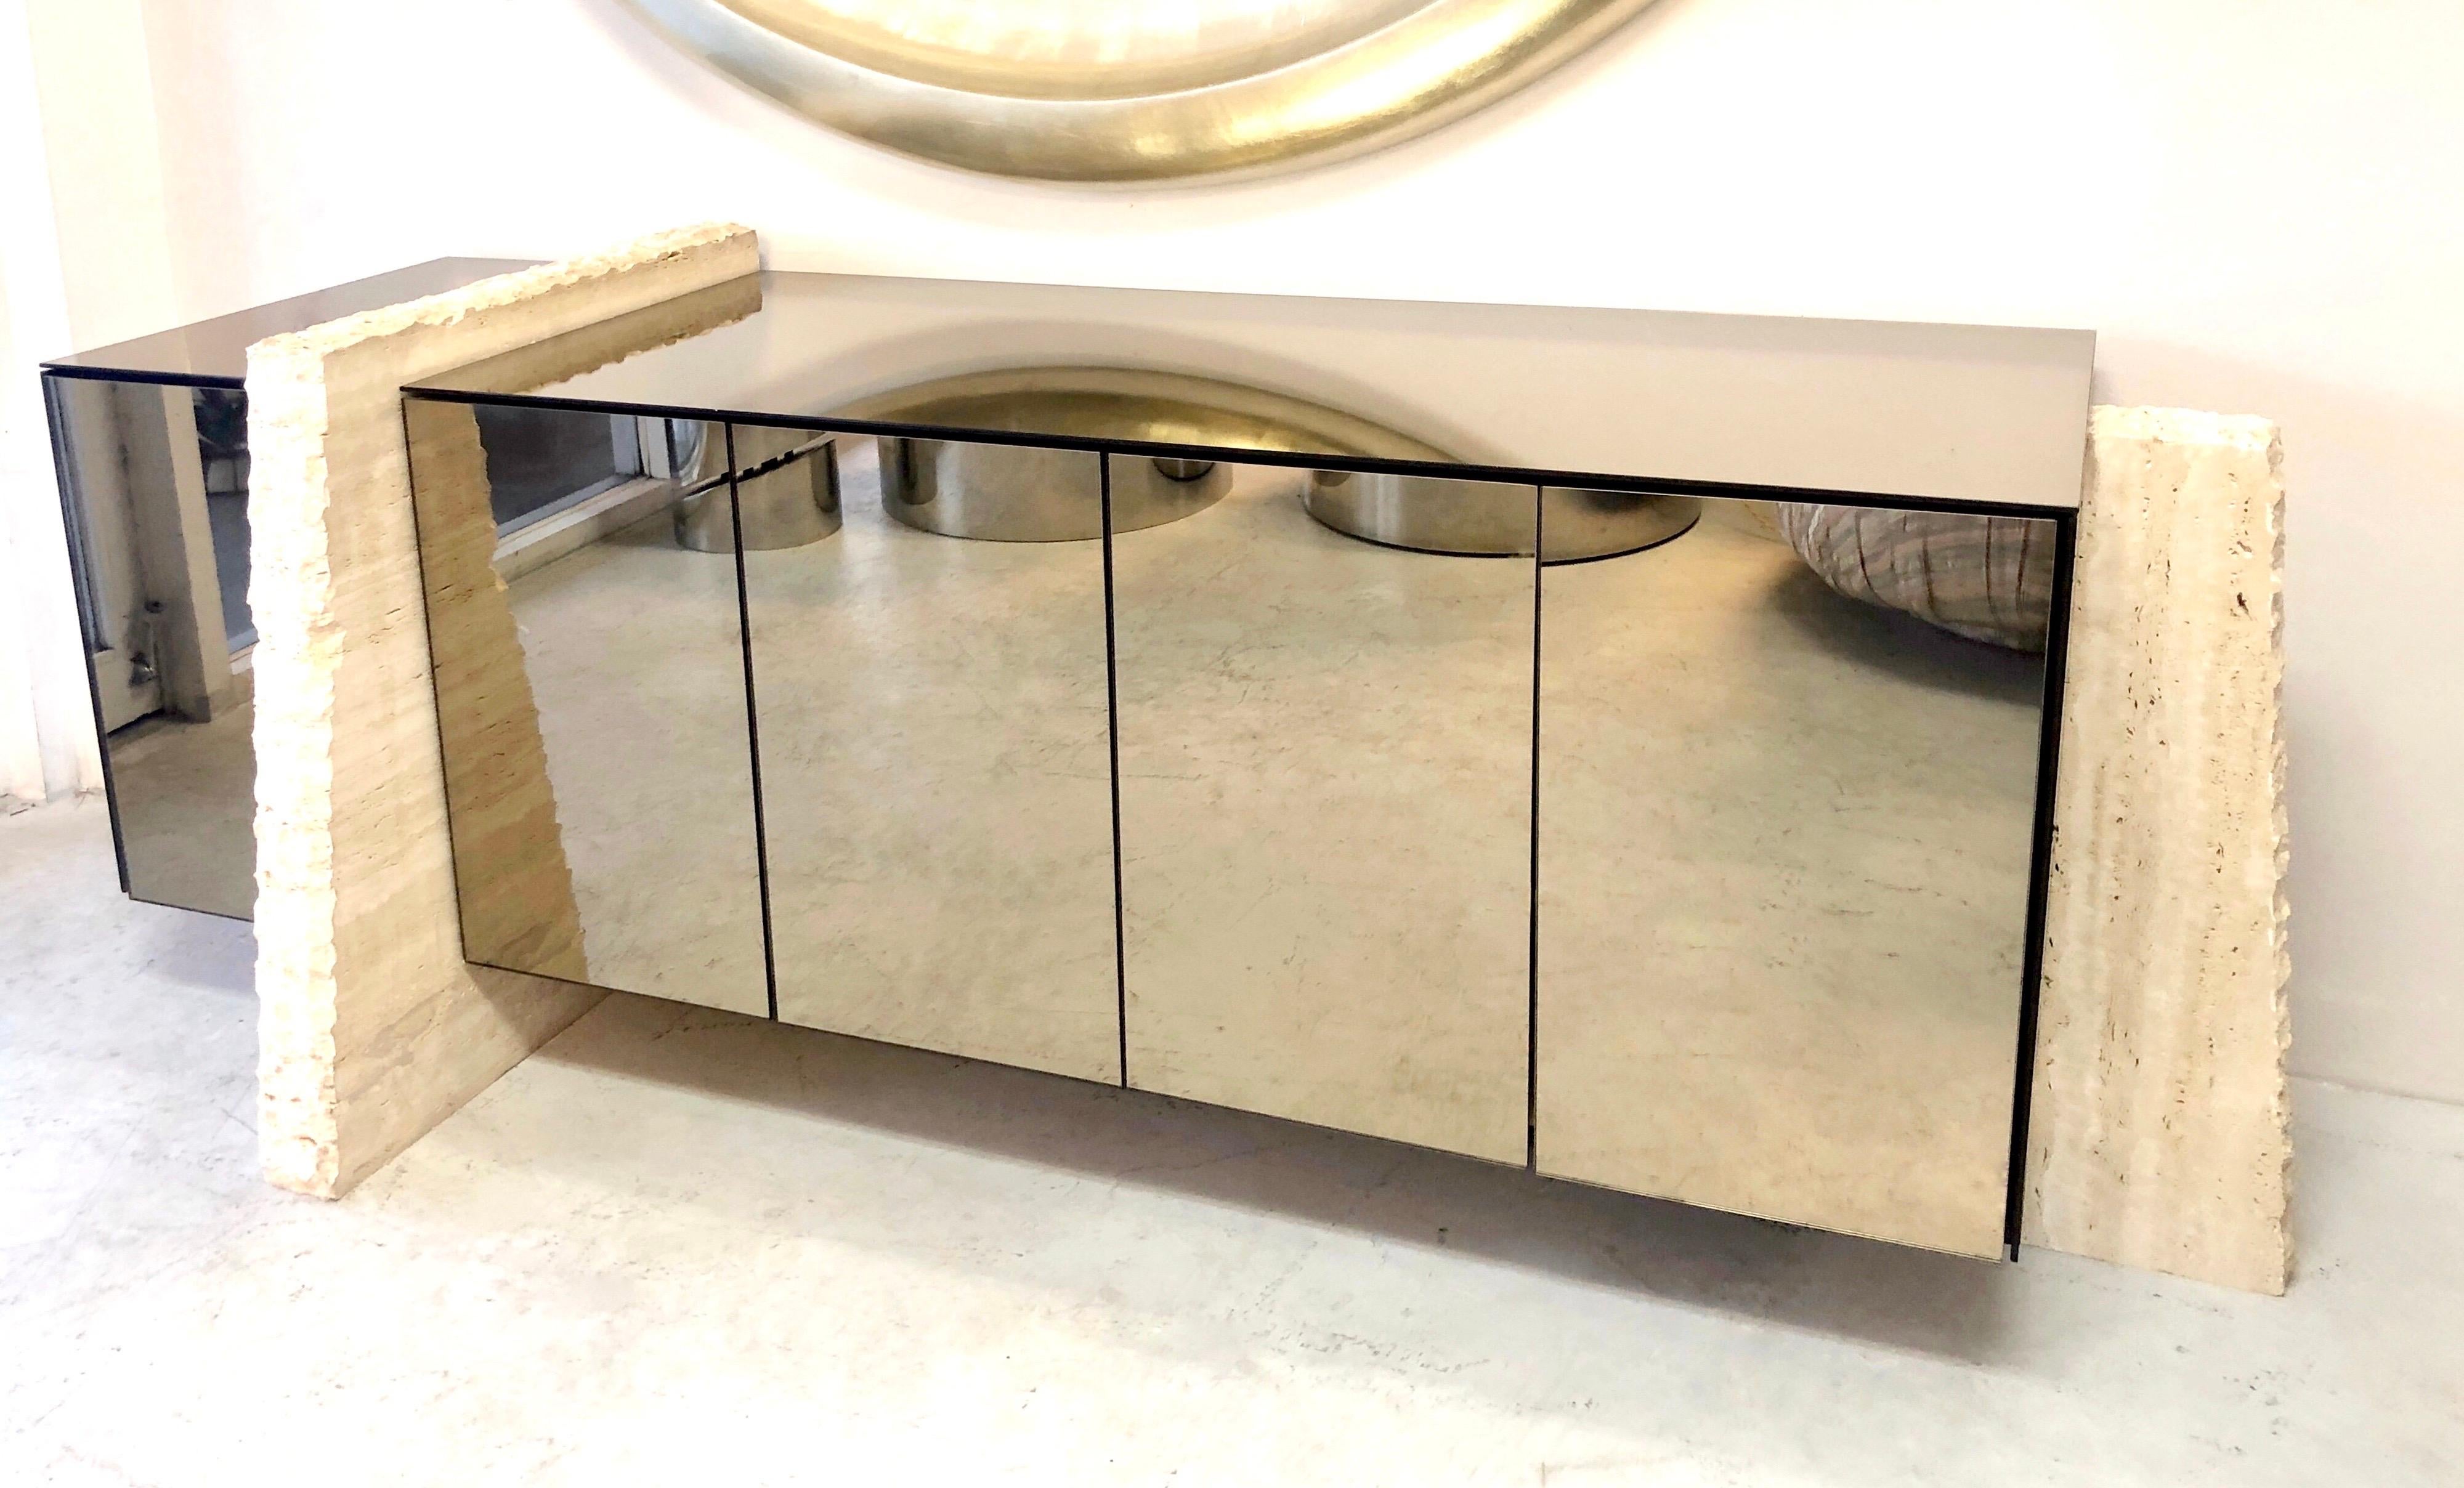 Spectacular console. The body is clad in bronze mirror, and supported on thick pieces of travertine marble. 5 doors conceal adjustable shelves.
The actual cabinet is 20.5” deep. The travertine slab is 27” at the floor.